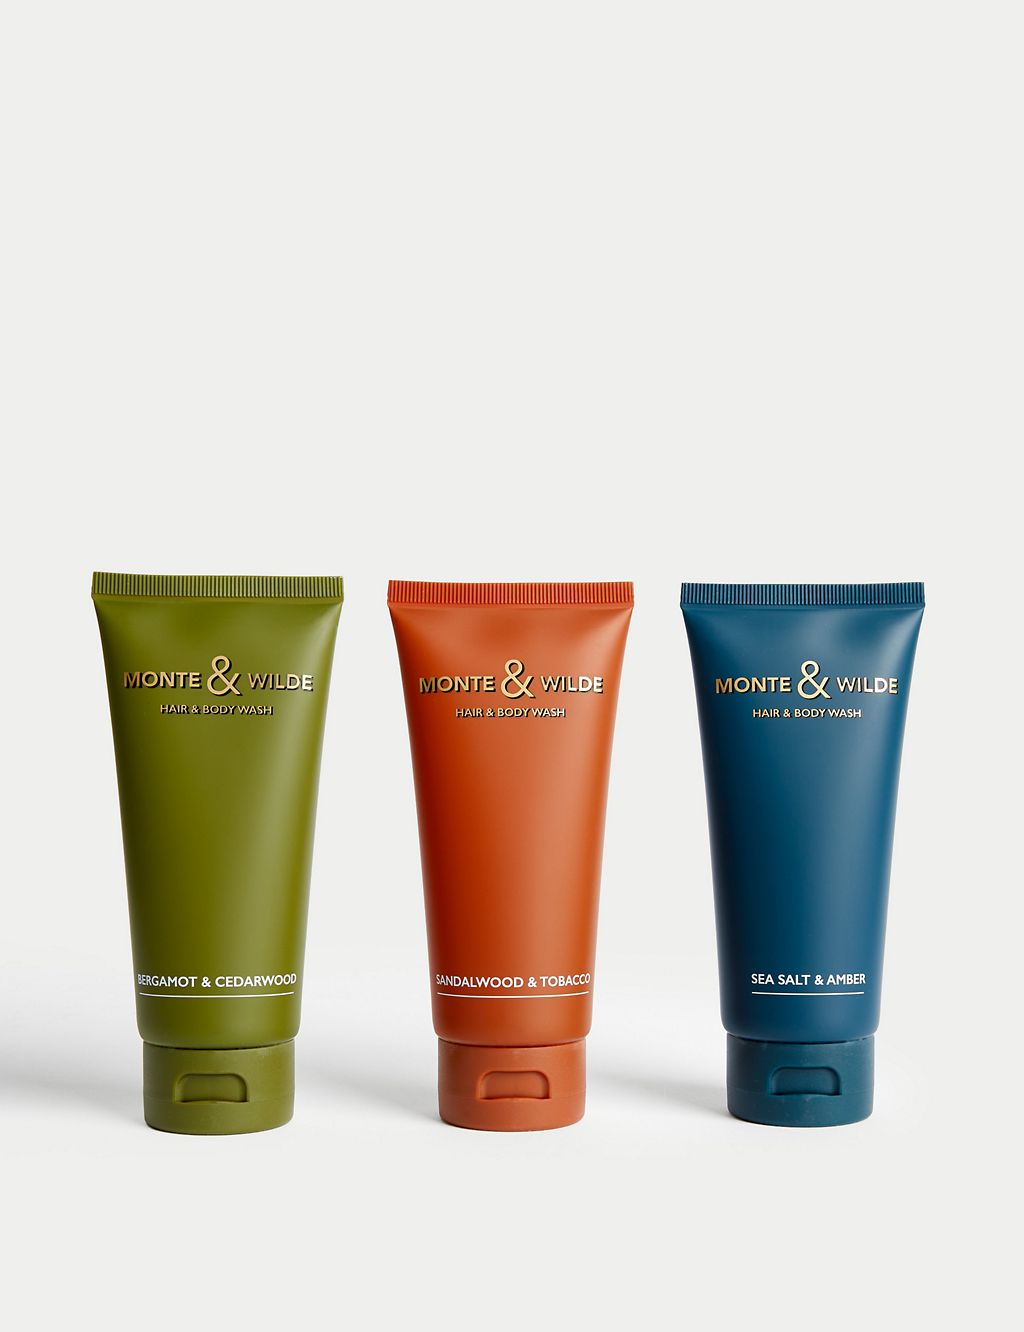 Hair & Body Wash Collection 1 of 3